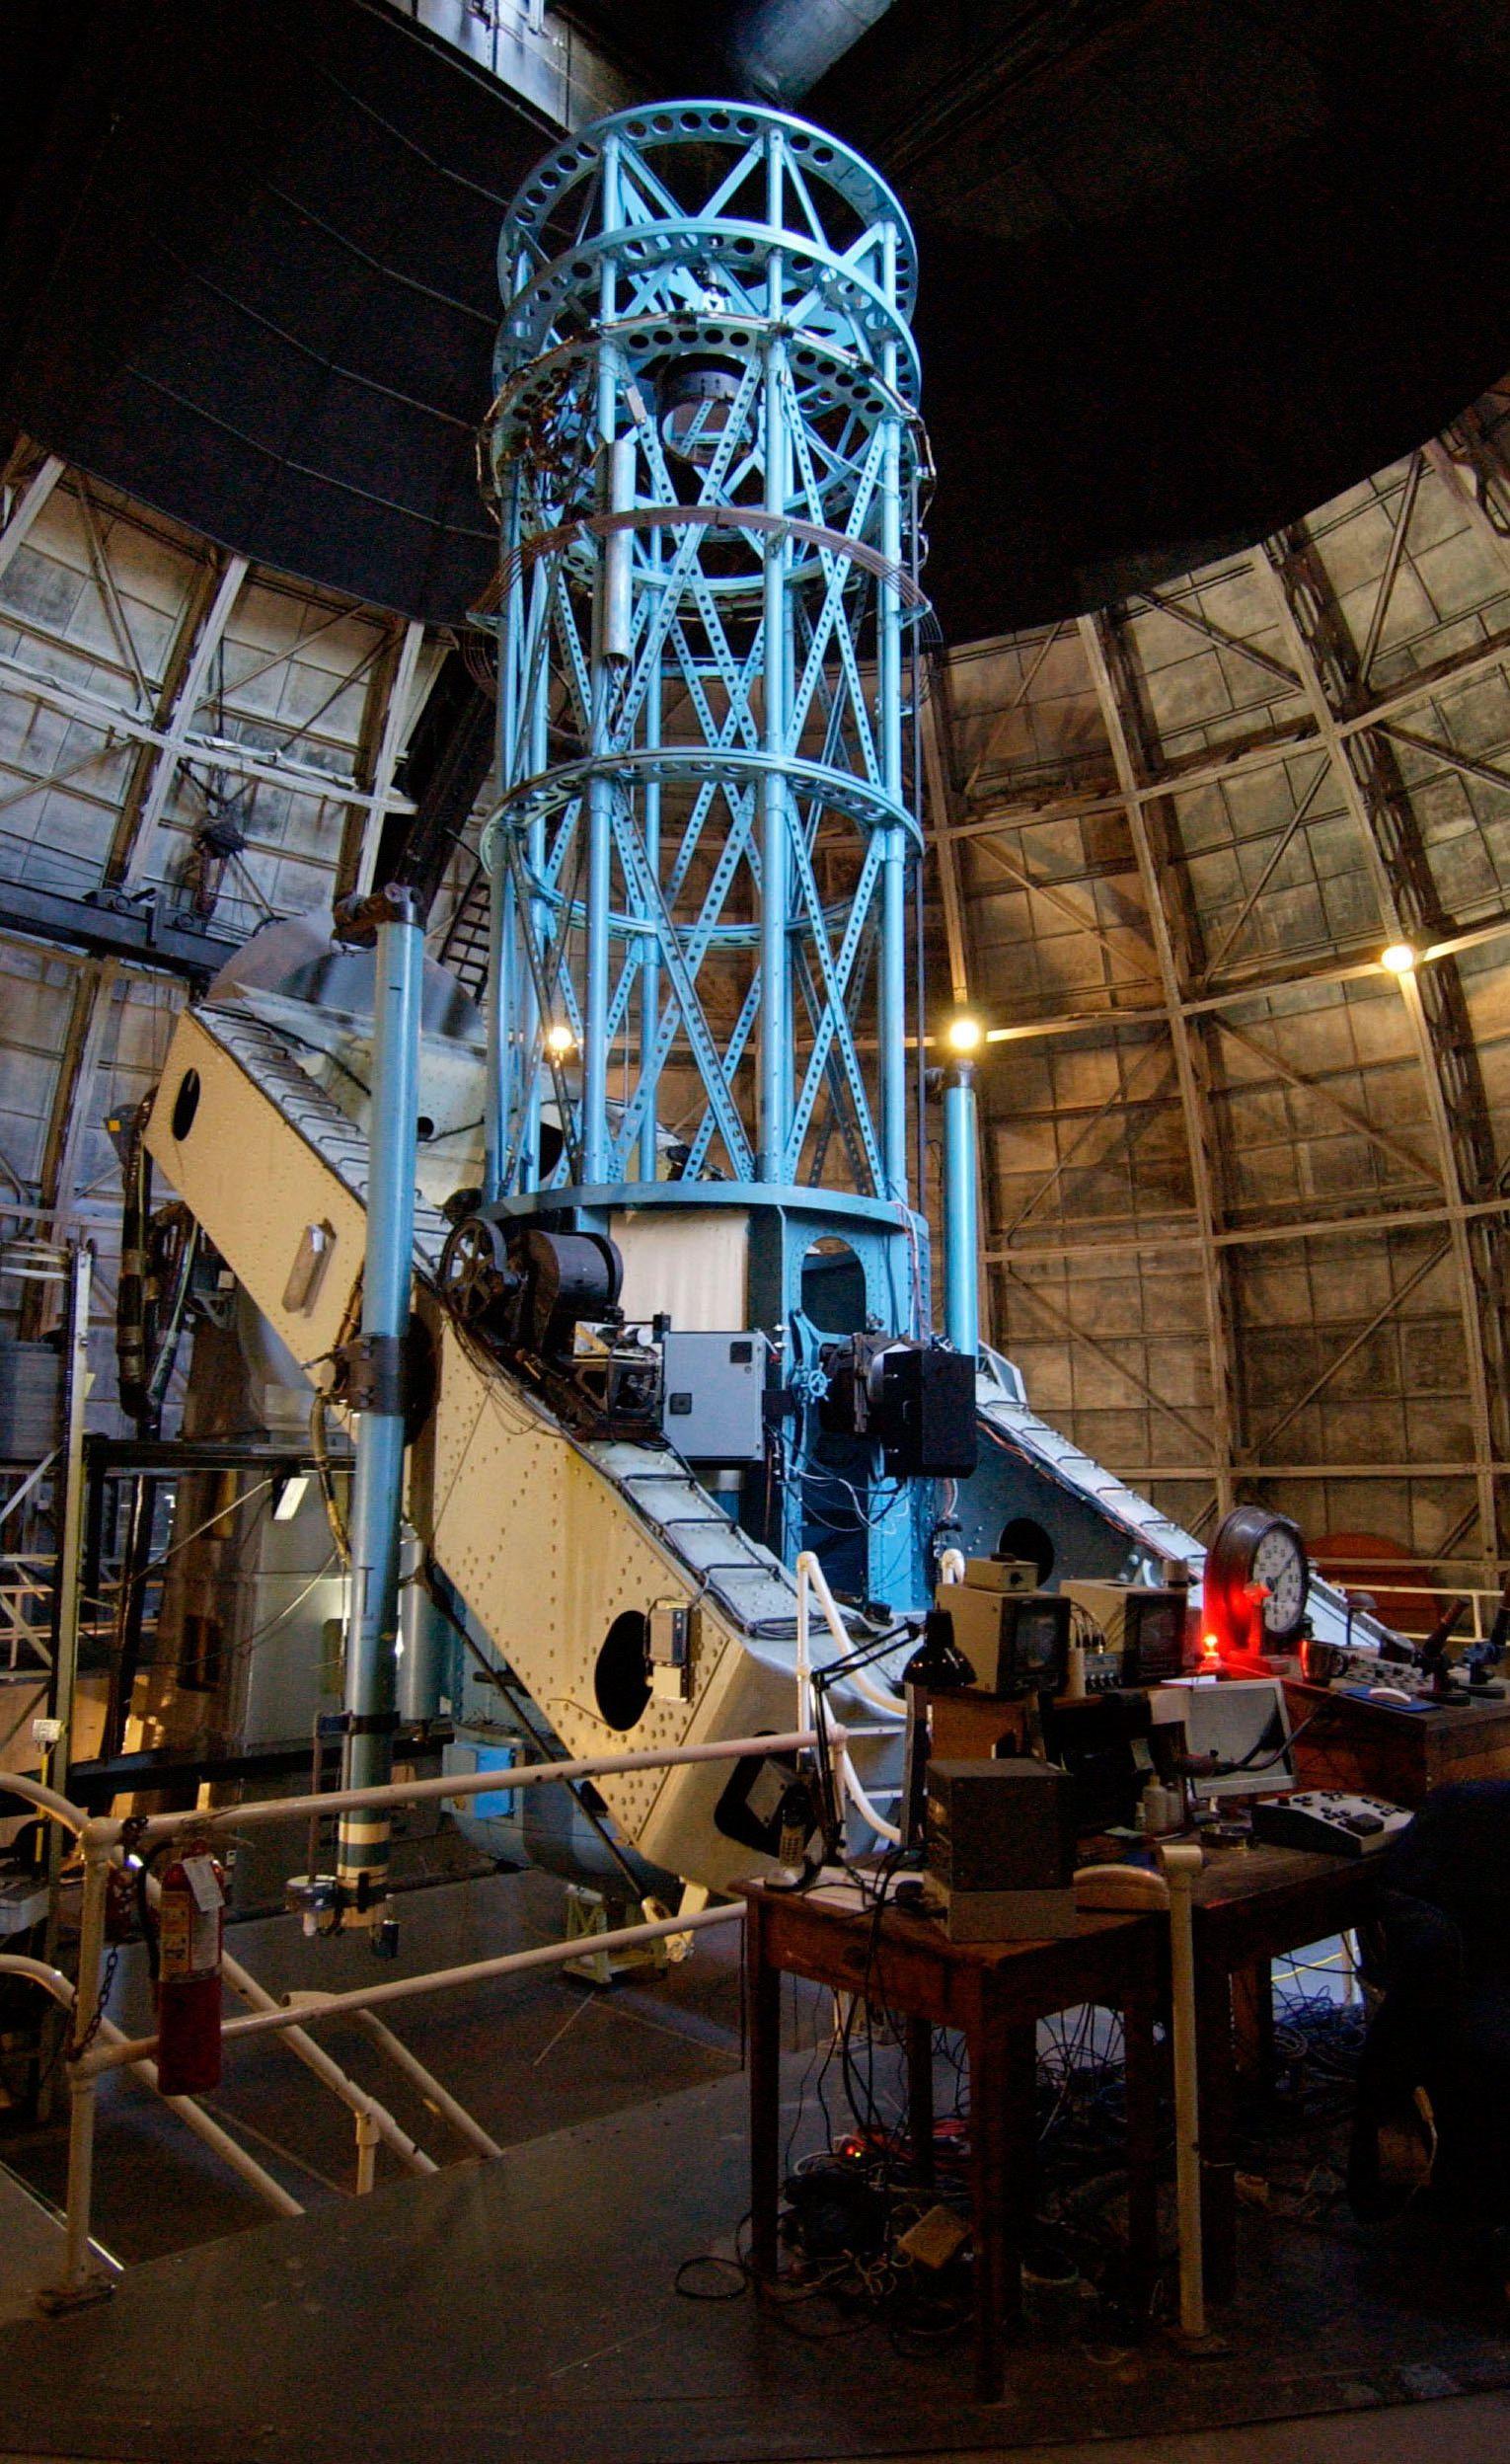 The 100 inch (2.5 m) Hooker telescope at Mount Wilson Observatory near Los Angeles, California. This is the telescope that Edwin Hubble used to measure galaxy redshifts and discover the general expansion of the universe. Credit: Andrew Dunn